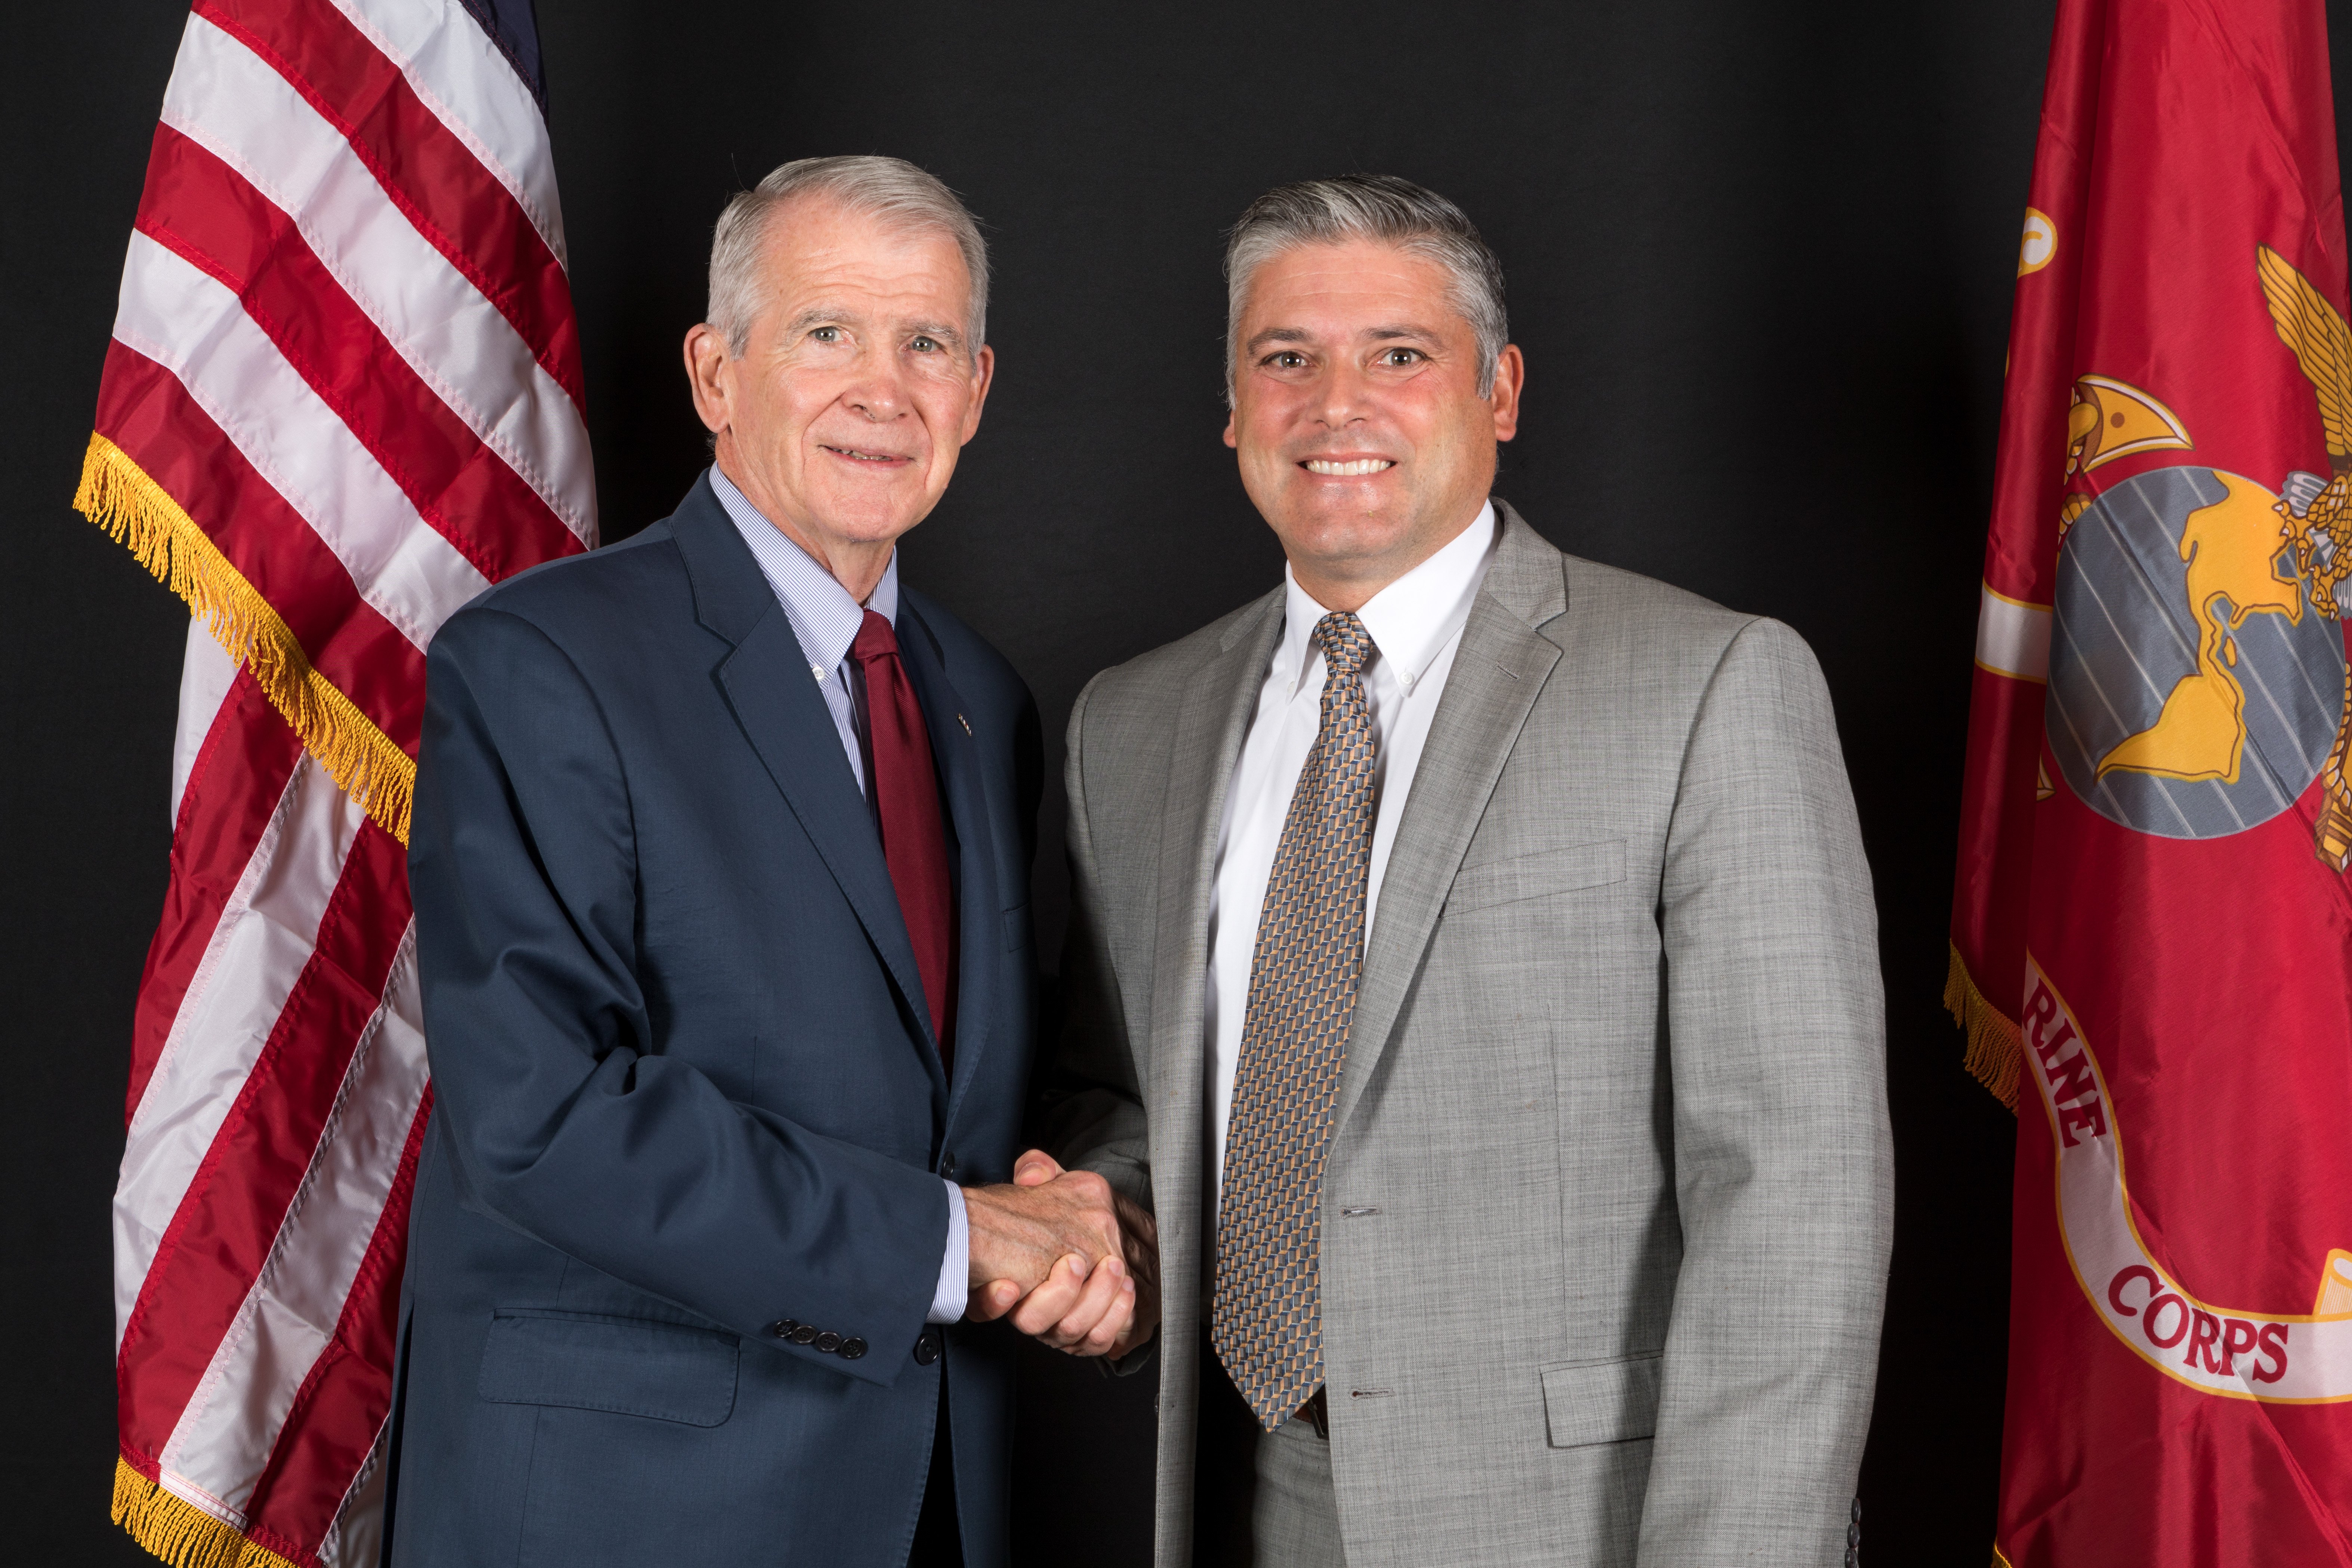 Lt. Col. Oliver North and Dante DAlessandro